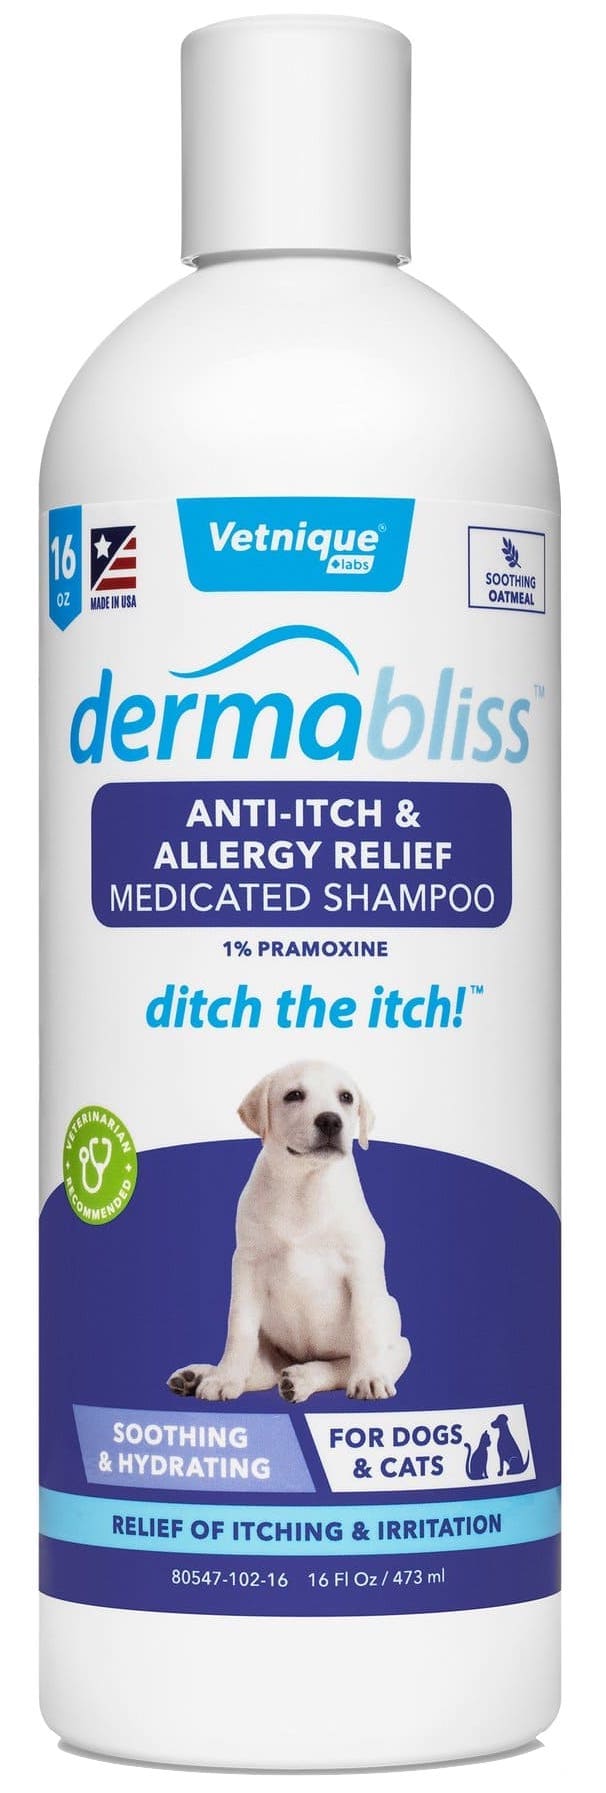 Dermabliss Anti-Itch & Allergy Relief Medicated Shampoo 16 oz 1